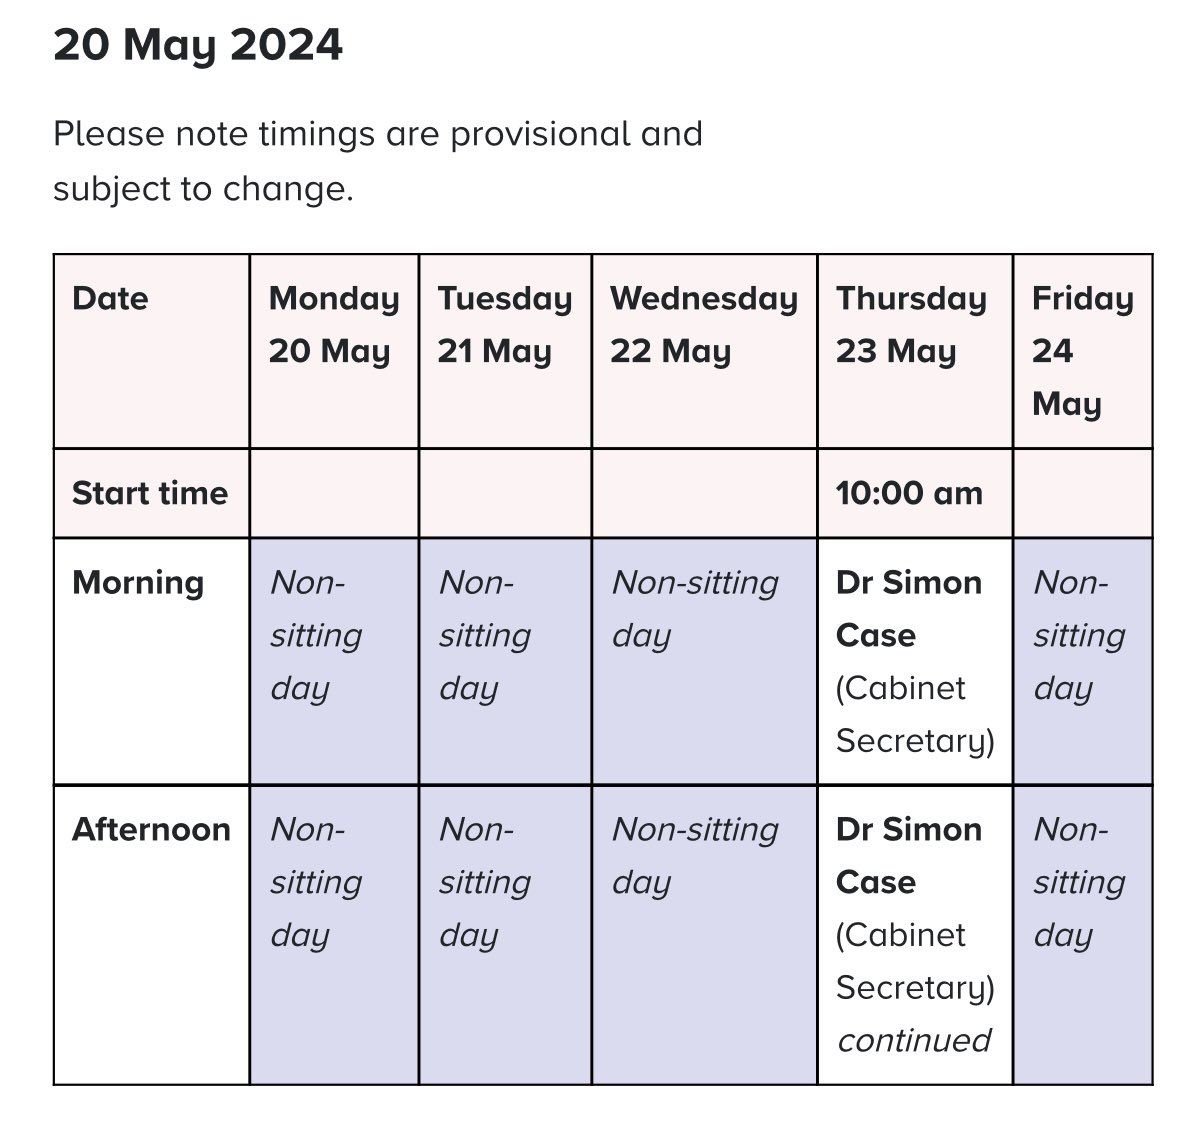 🚨At the #CovidInquiry tomorrow, Module 2 - Core UK decision-making and political governance: 🔴 Simon Case - Cabinet Secretary (was Downing Street Permanent Secretary to @BorisJohnson for part of 2020) The #LongCovidGroups are Core Participants in this module. #LongCovid